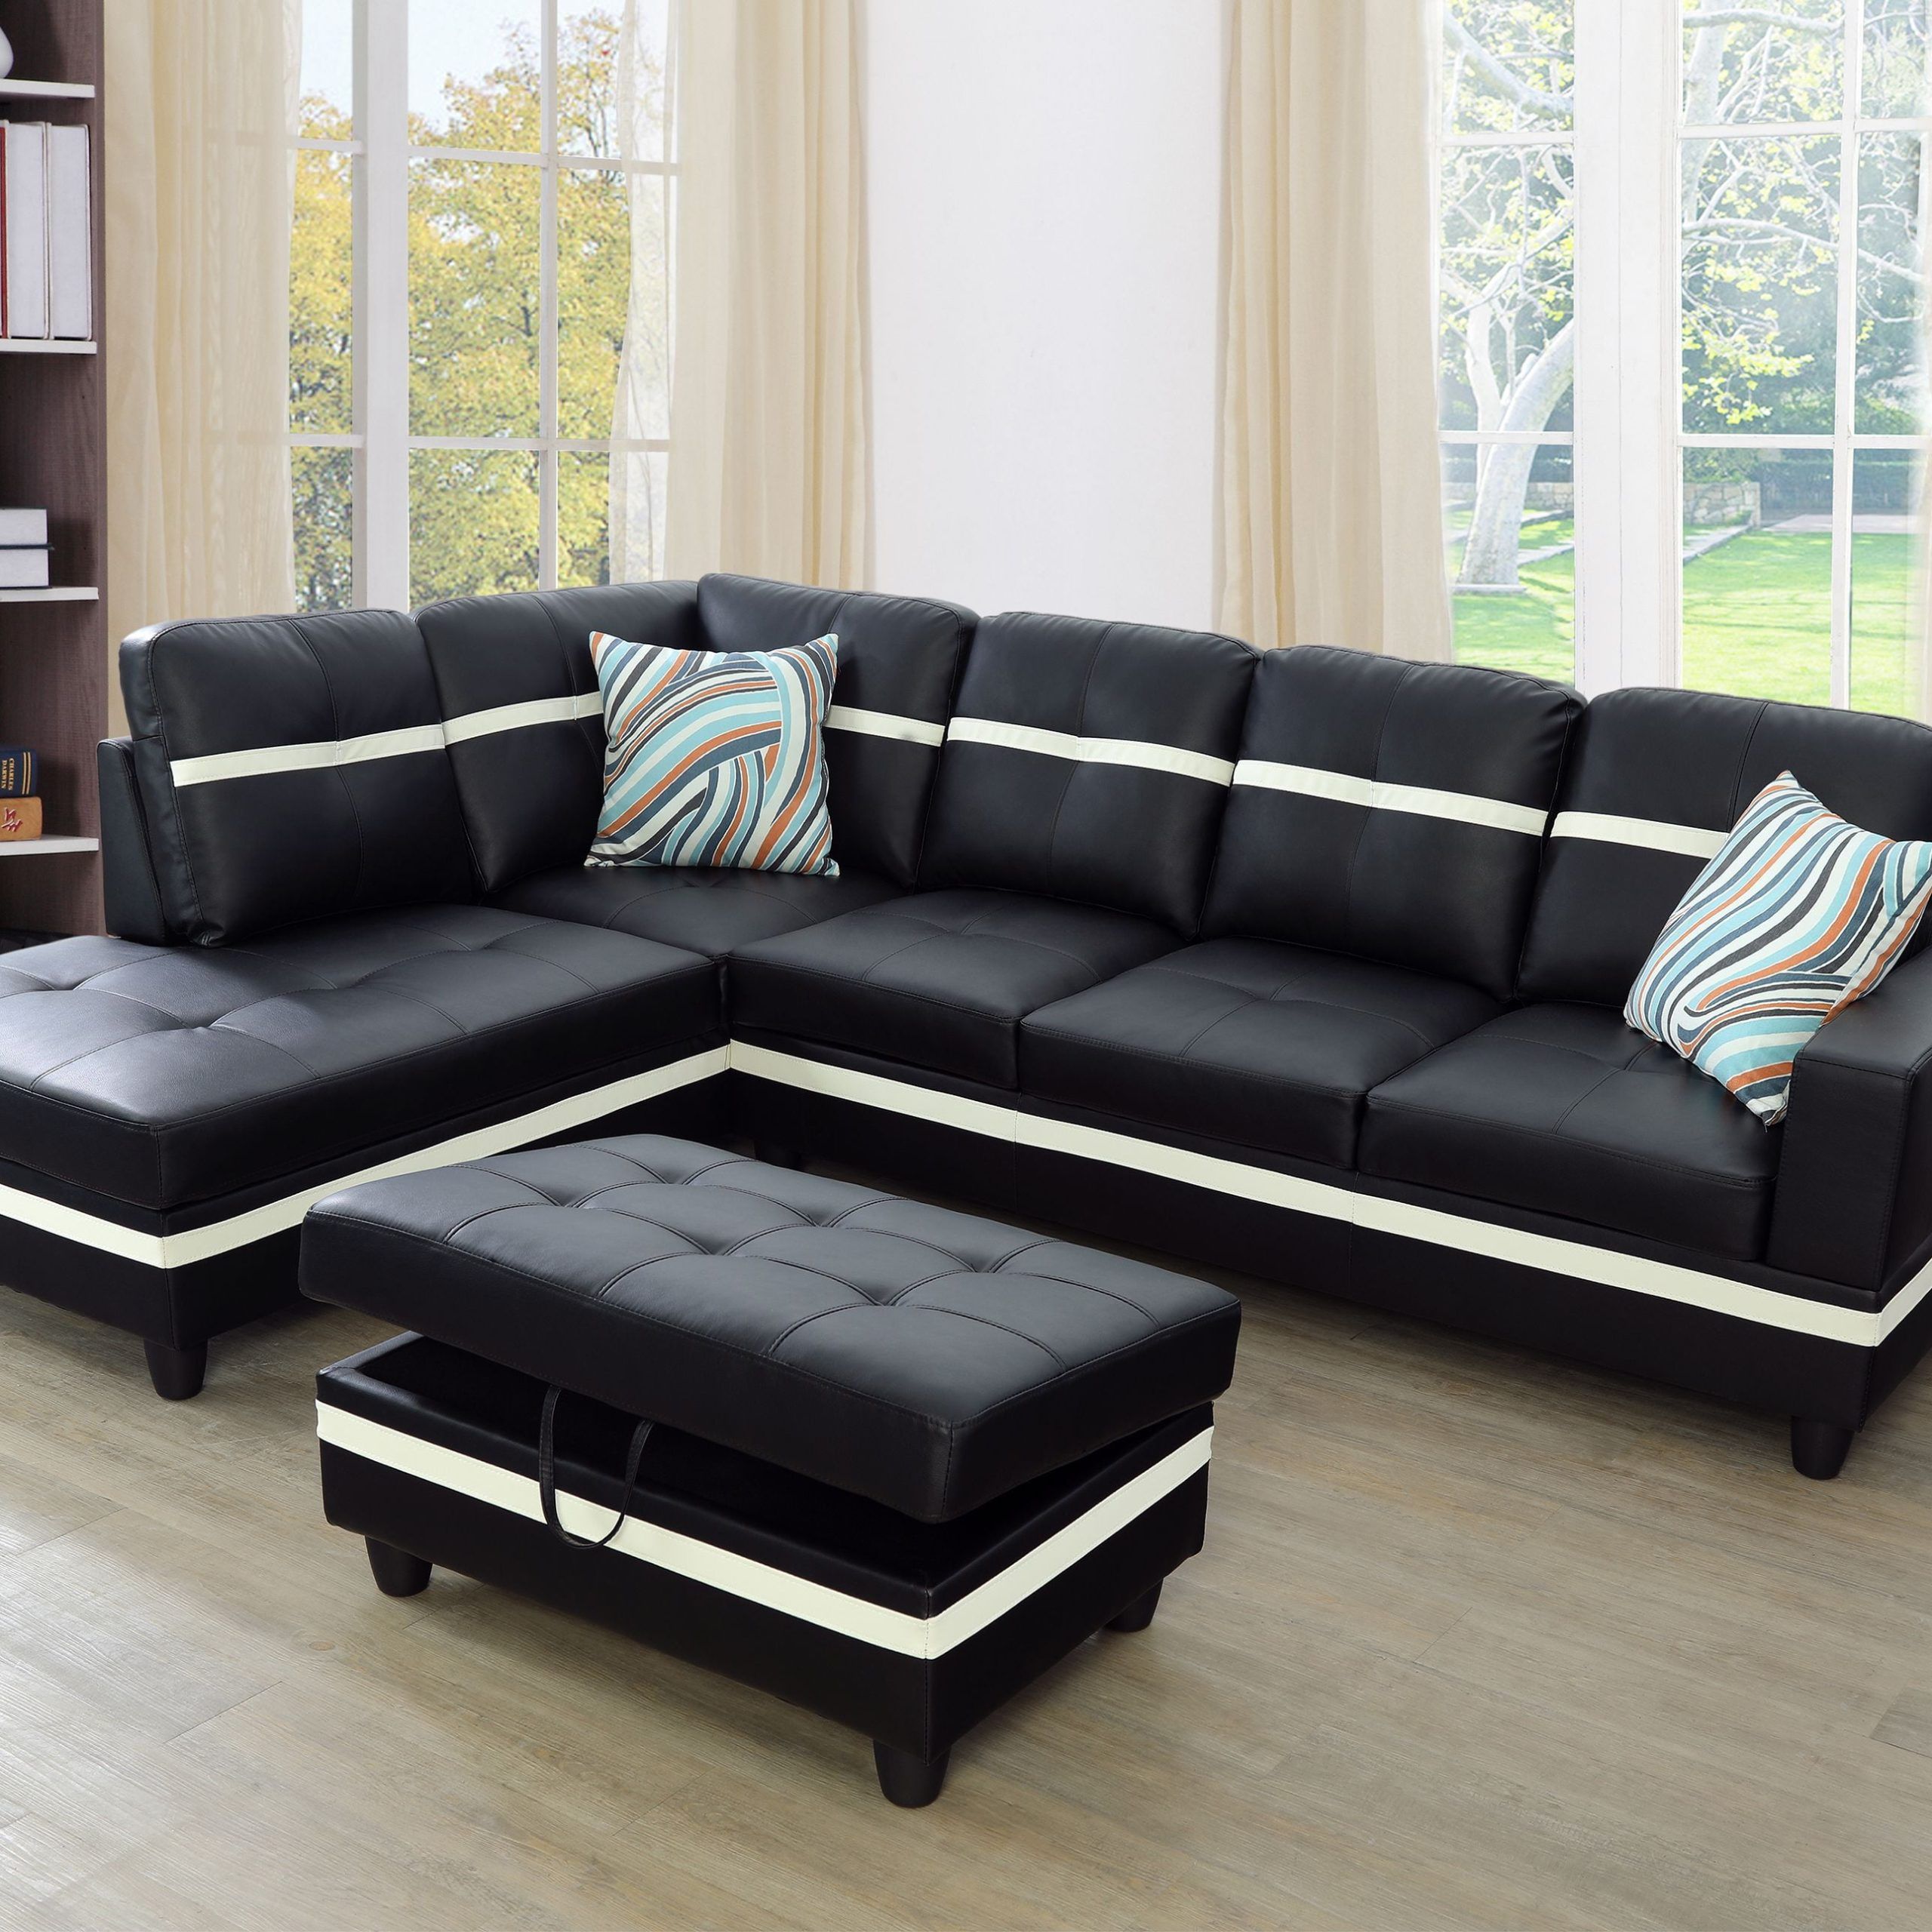 Aycp Furniture_new Style_ L Shape Sectional Sofa Set With Storage For Sofas With Ottomans (Gallery 9 of 20)